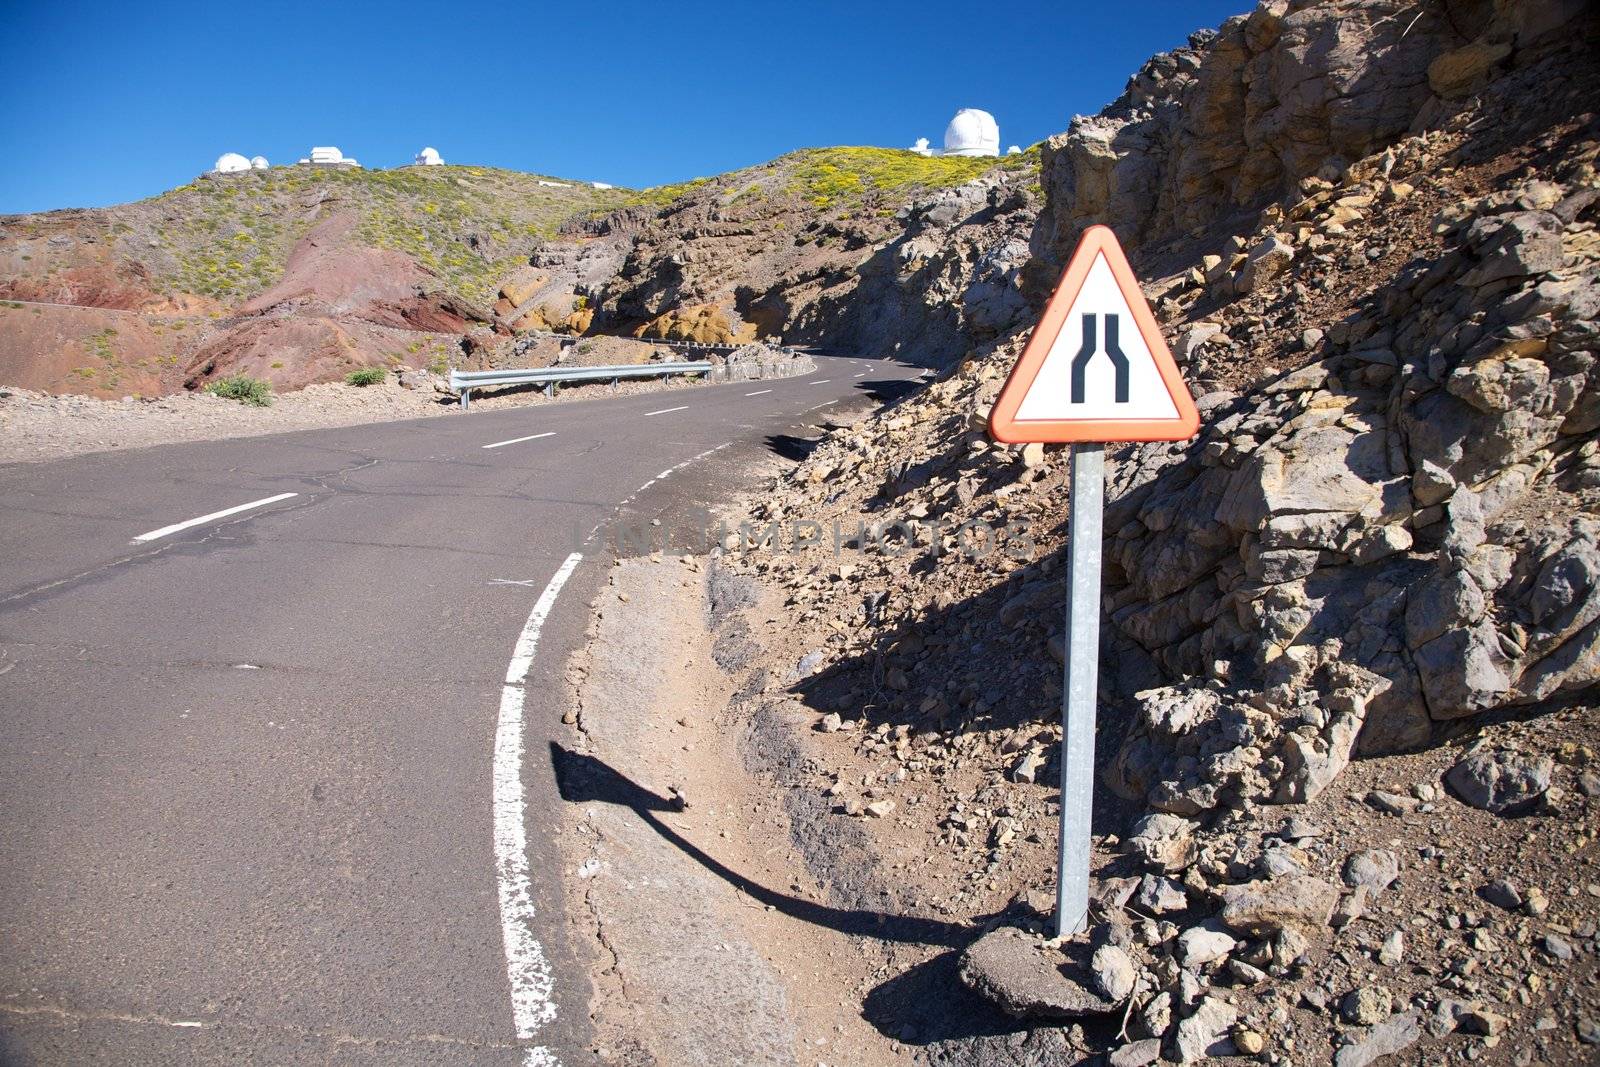 narrowing red signal in a road at La Palma Canary Islands Spain